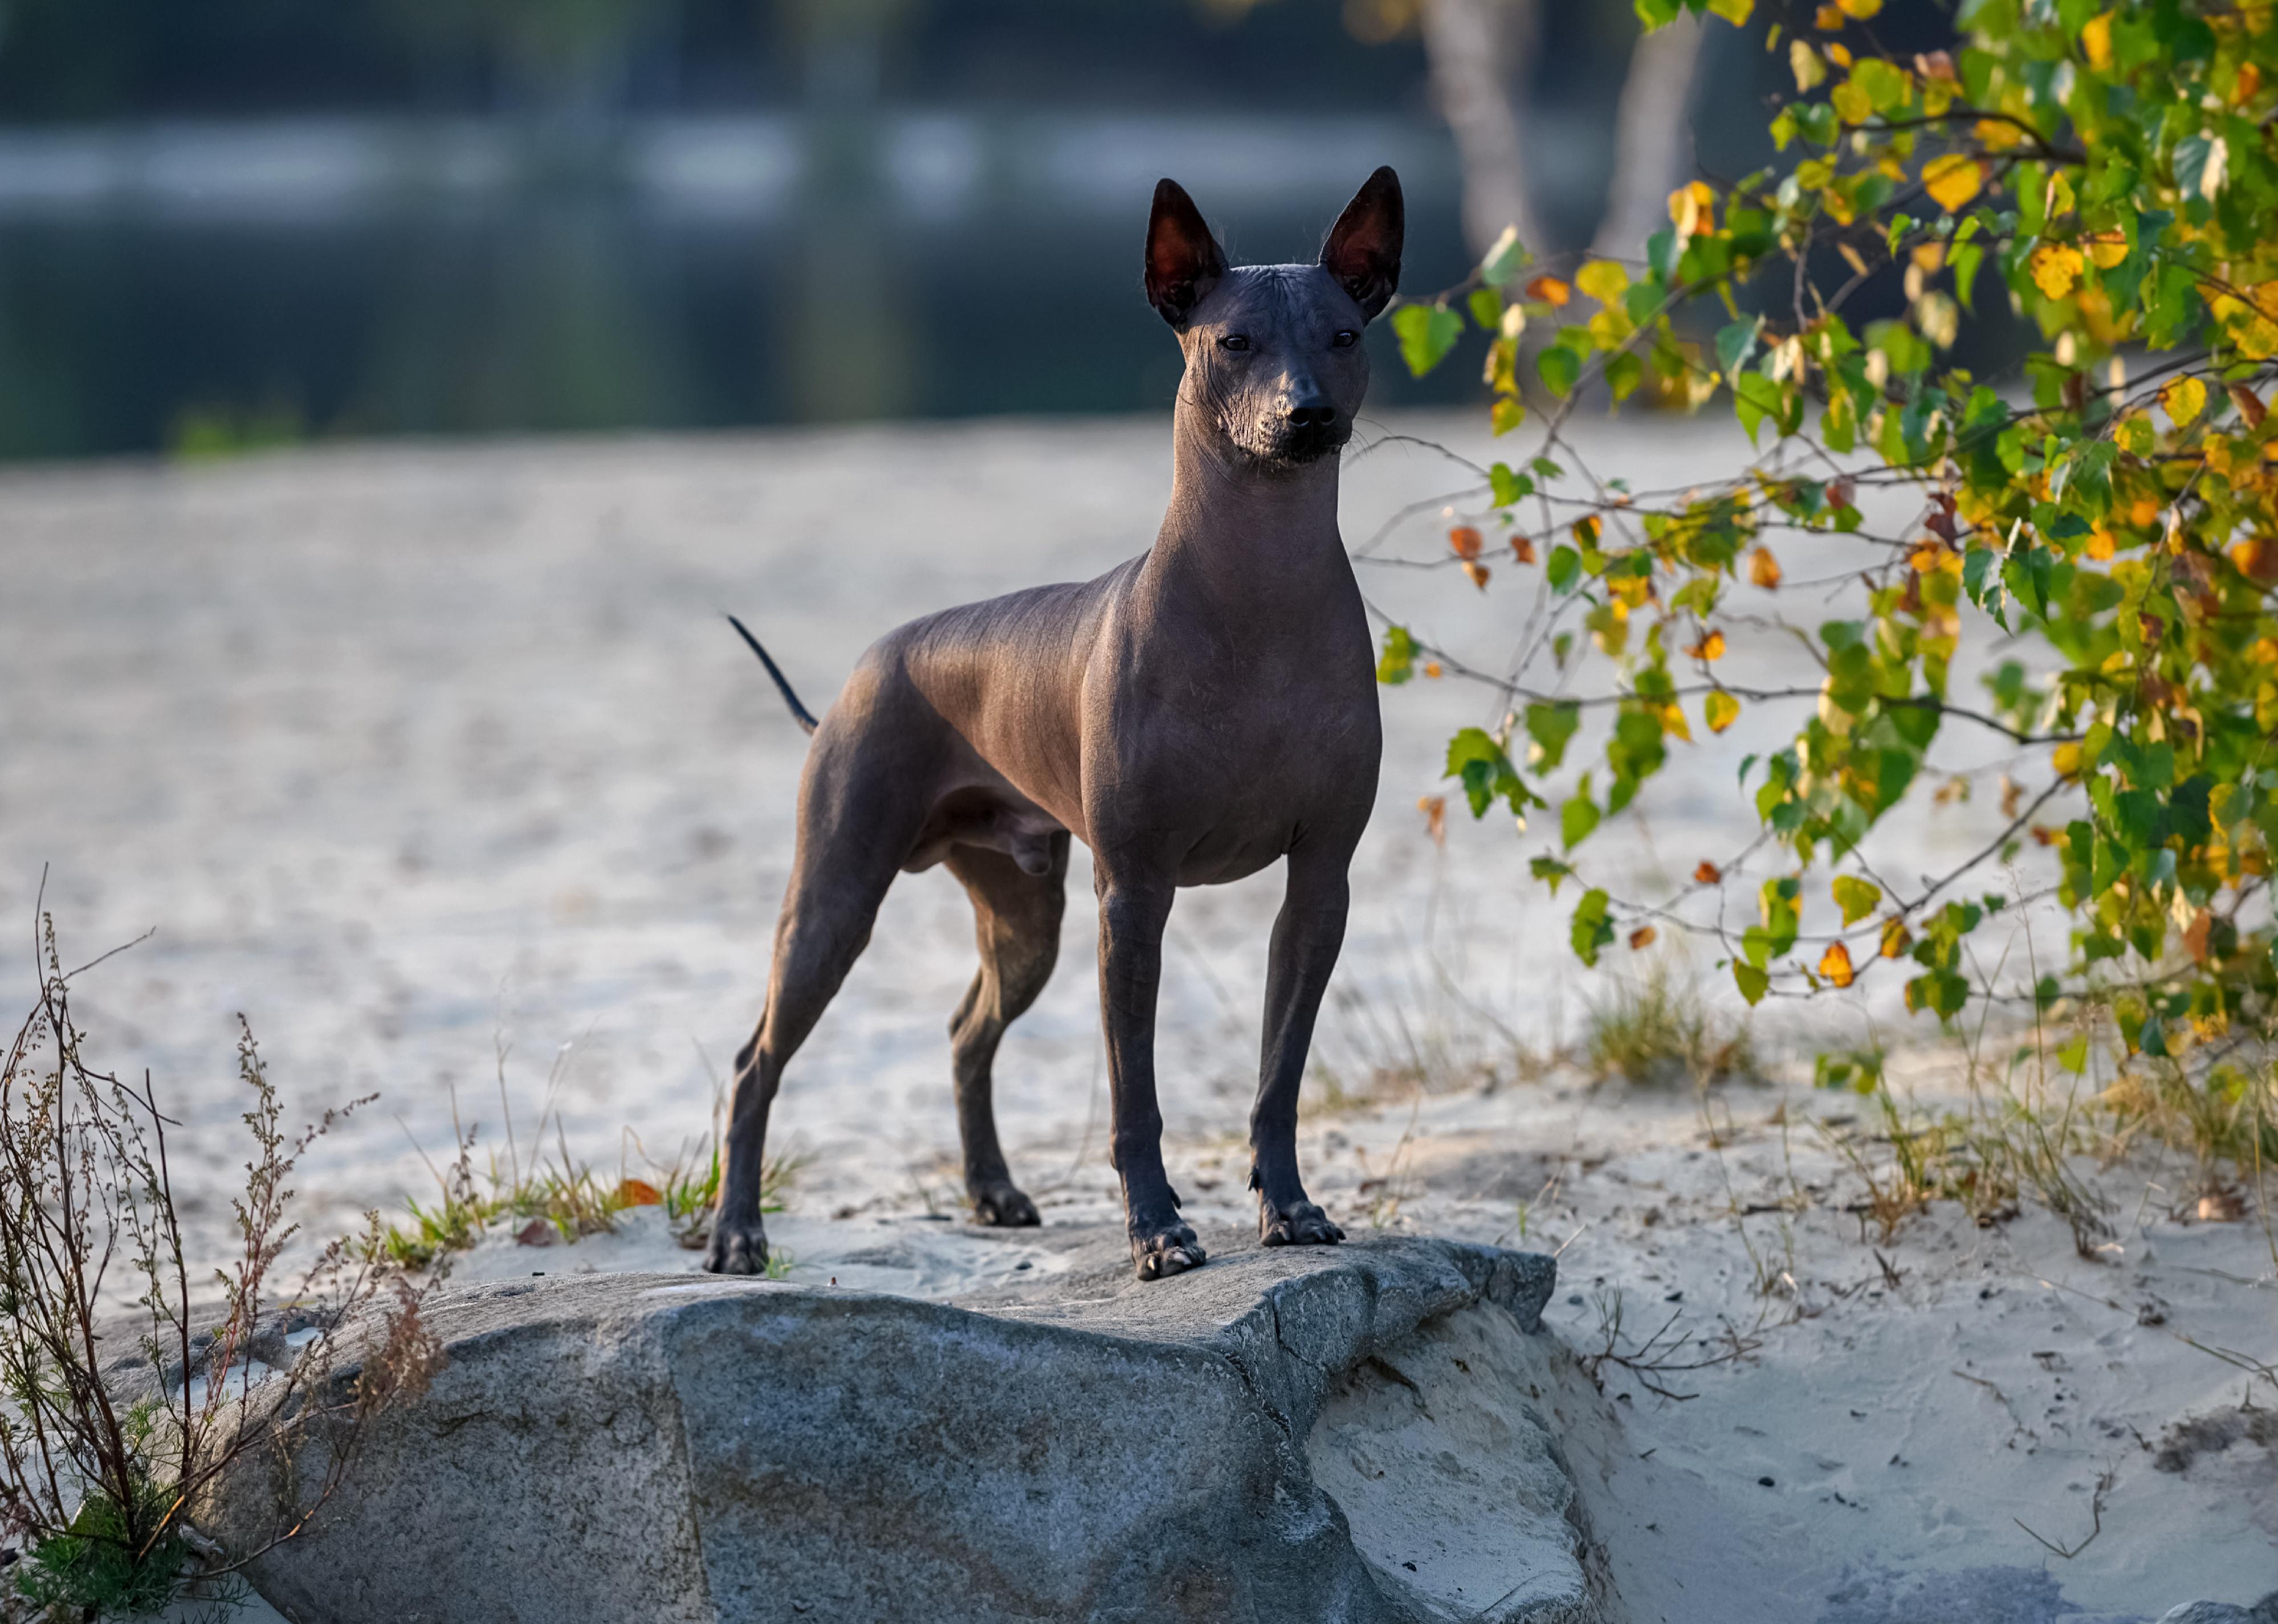 A Xoloitzcuintle standing on stone at sunset.